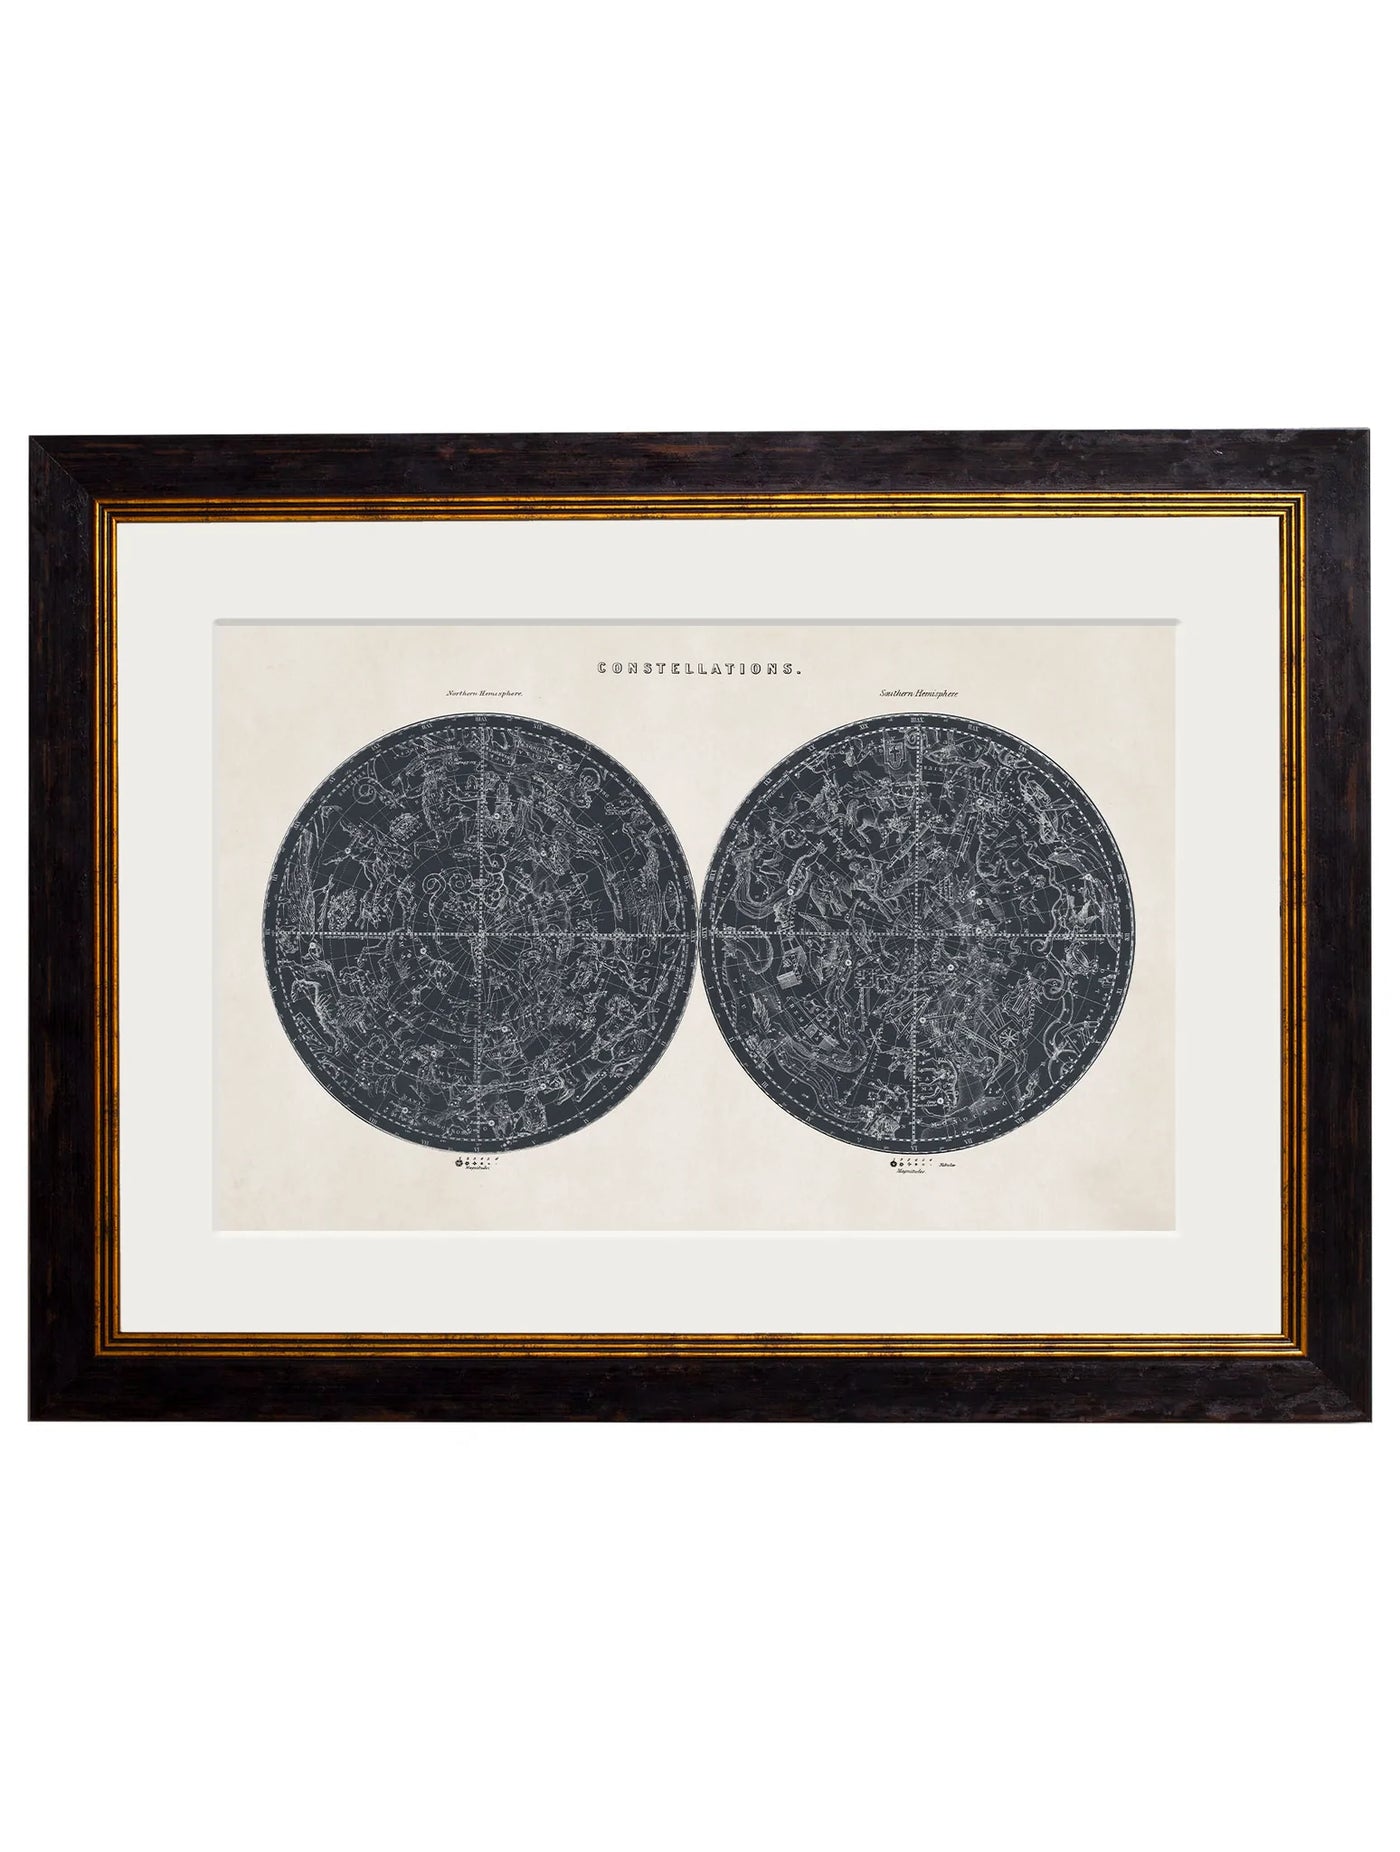 C.1800 MAP OF THE CONSTELLATIONS - TheArtistsQuarter